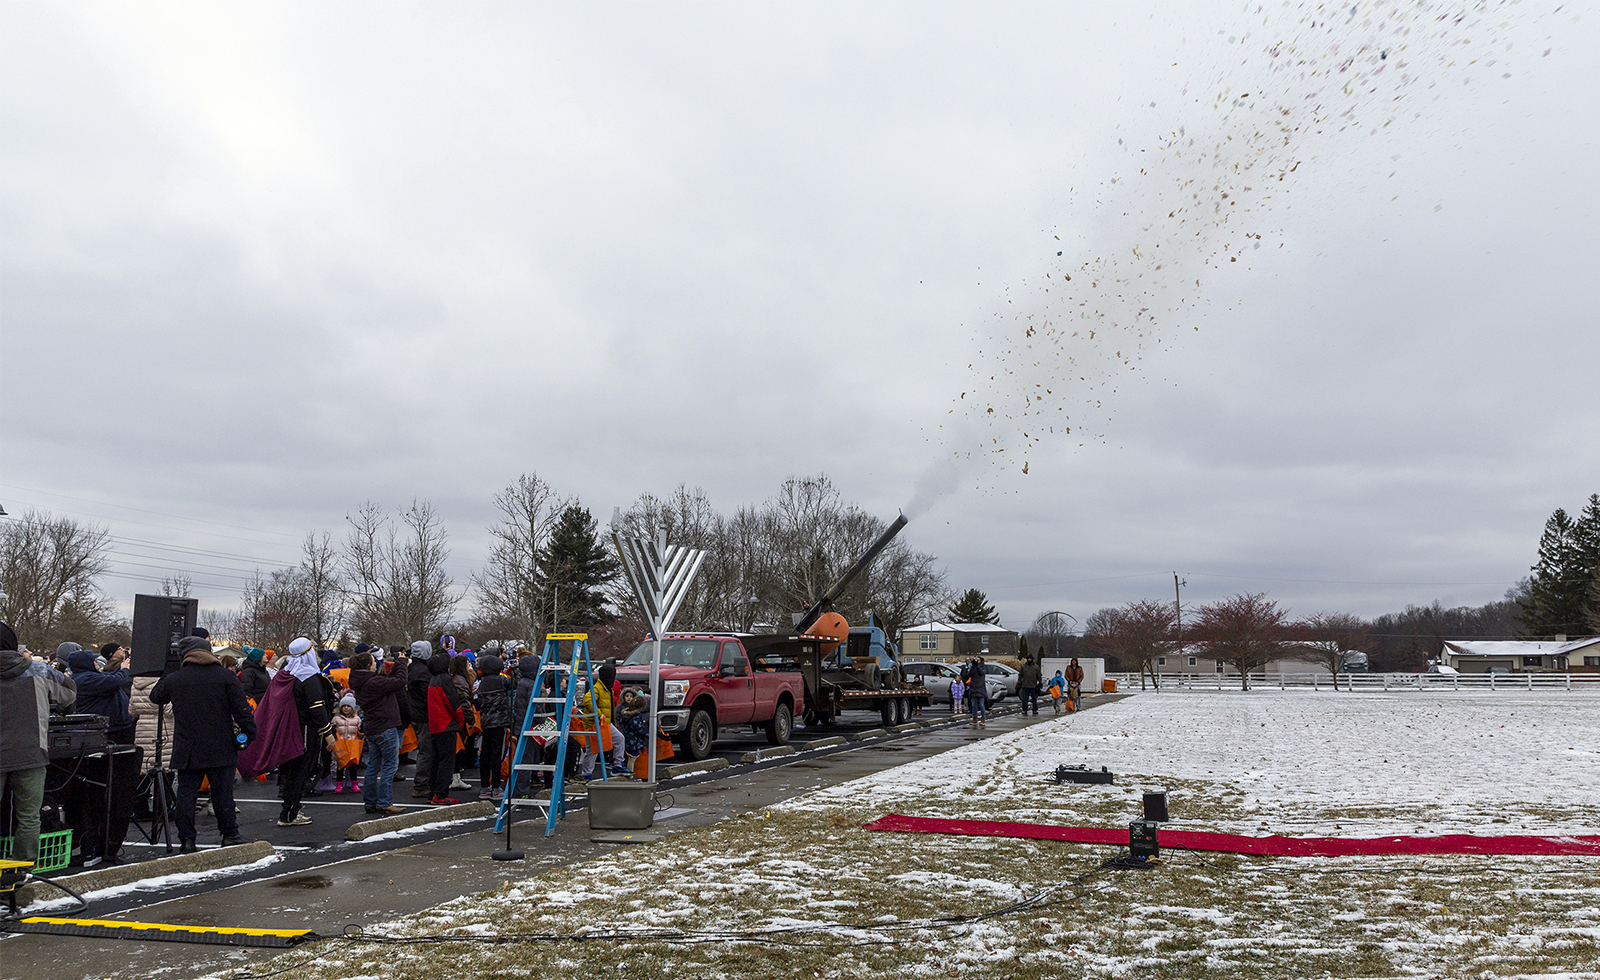 A candy cannon is shot from a flatbed trailer in Bevelhymer Park on Dec. 18, 2022, during events for the start of Hanukkah in Columbus, Ohio. Photo by Harry Acosta Photography